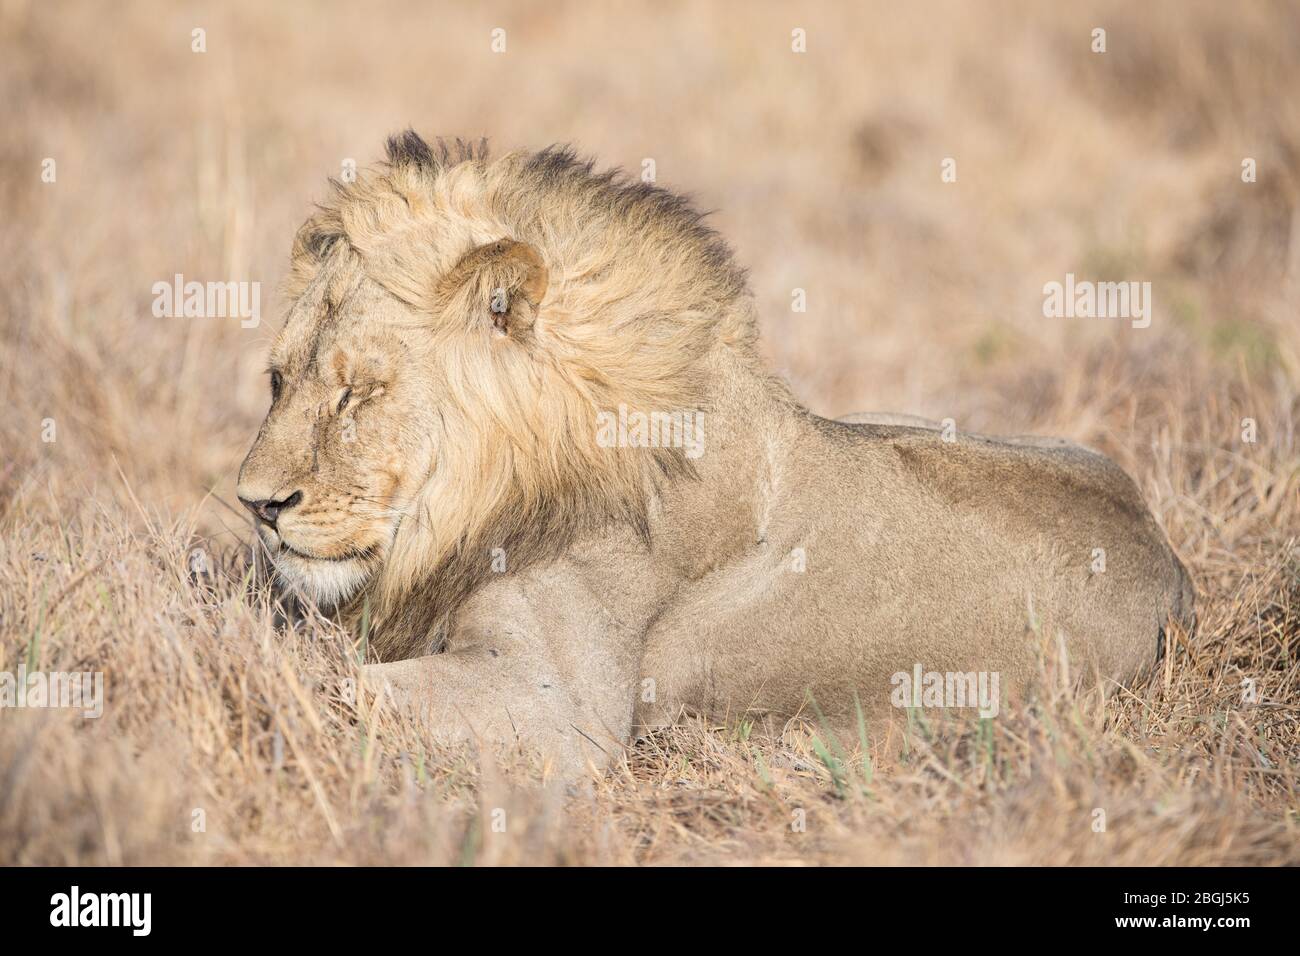 Busanga Plains, an exclusive safari destination in Kafue National Park, North-Western, Zambia, is home to a pride of African lions, Panthera leo. Stock Photo